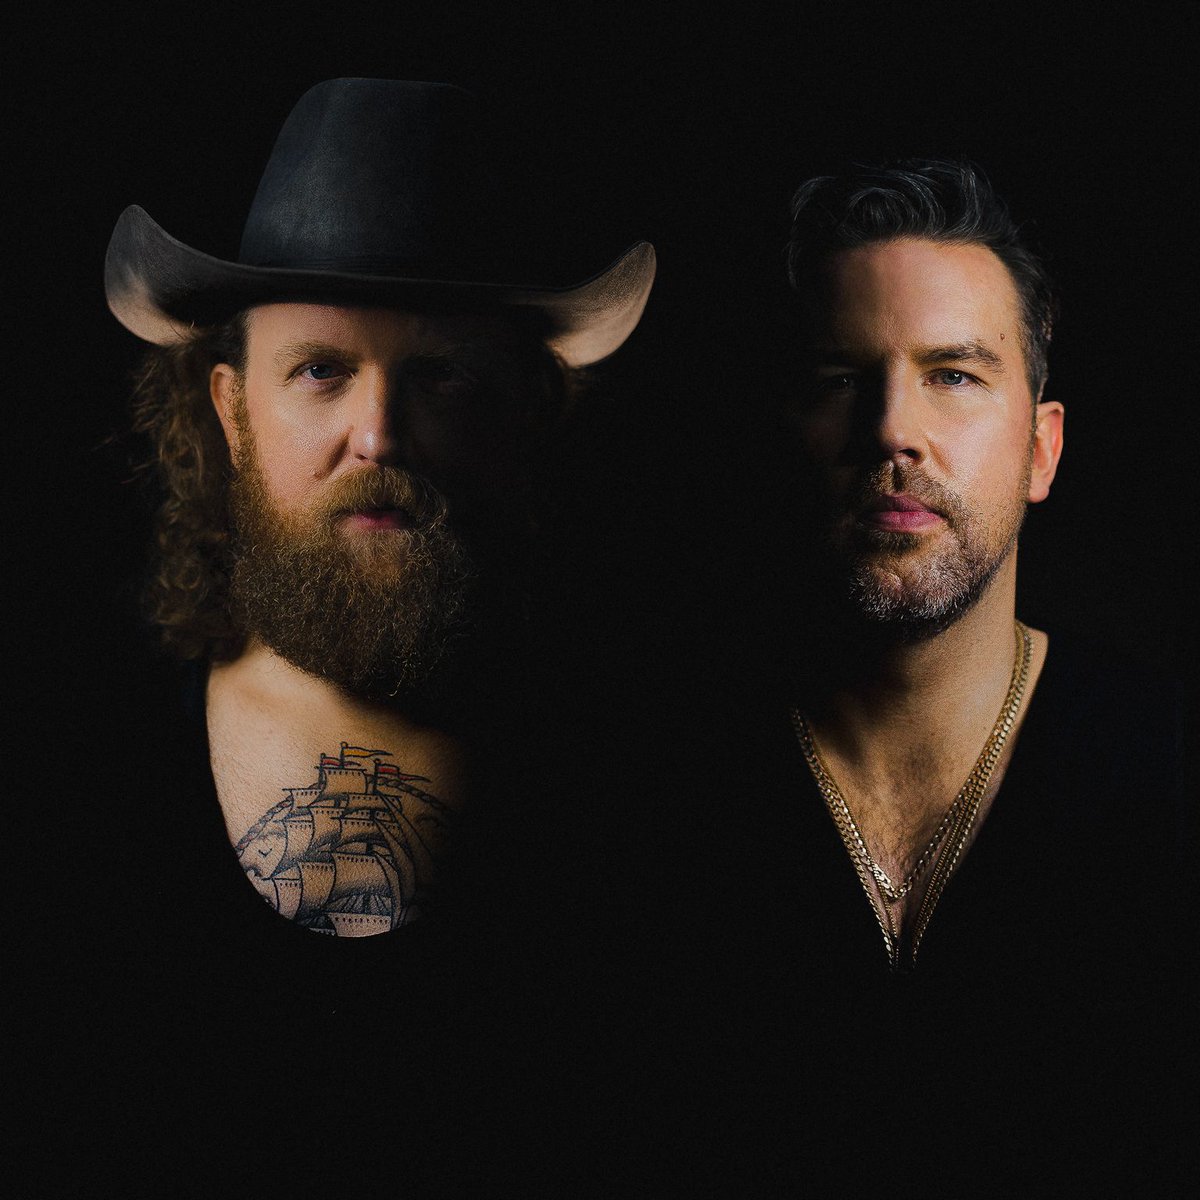 strm.to/BrothersOsborne It’s been nearly 3 years since our last album dropped. A lot of change has happened in our lives and in the world as a whole. As we continue to evolve as people, so does our sound. But through it all, we are still us. For better and for worse at times. We…